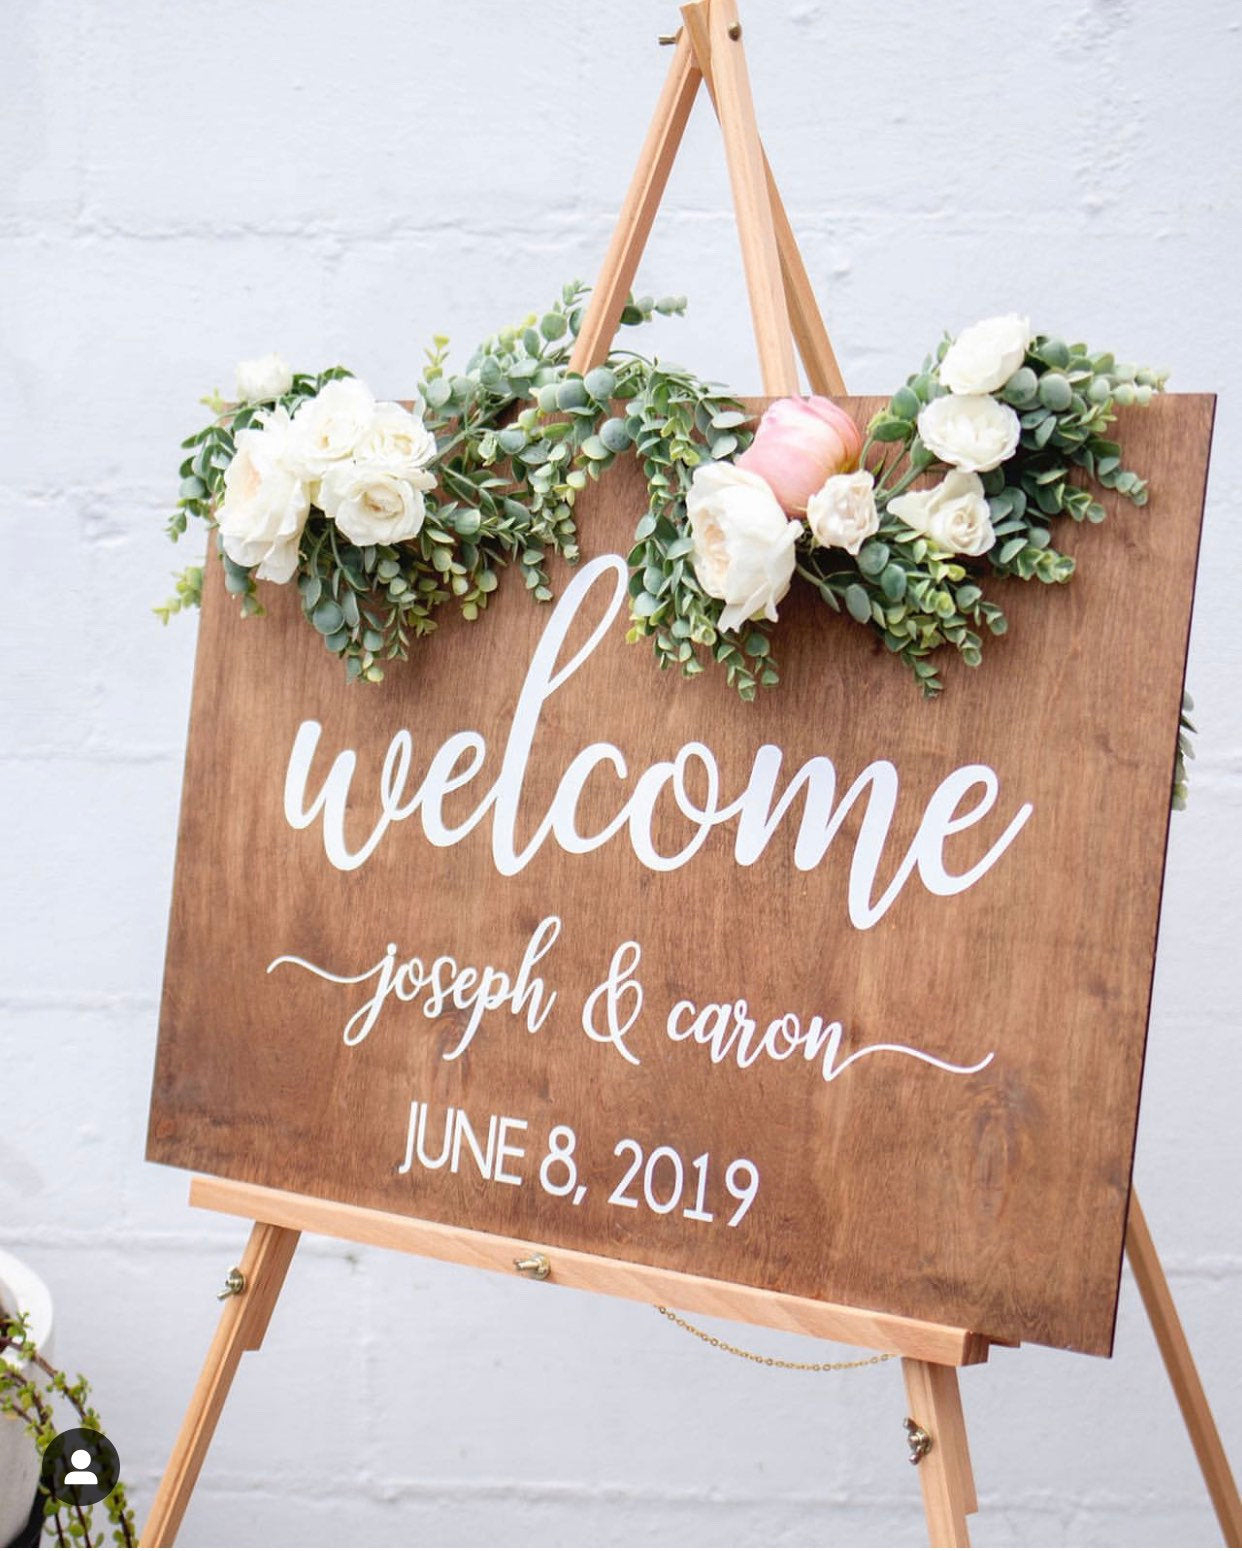 Rustic Wedding Welcome Sign - Happyism, Inc. Engraving 